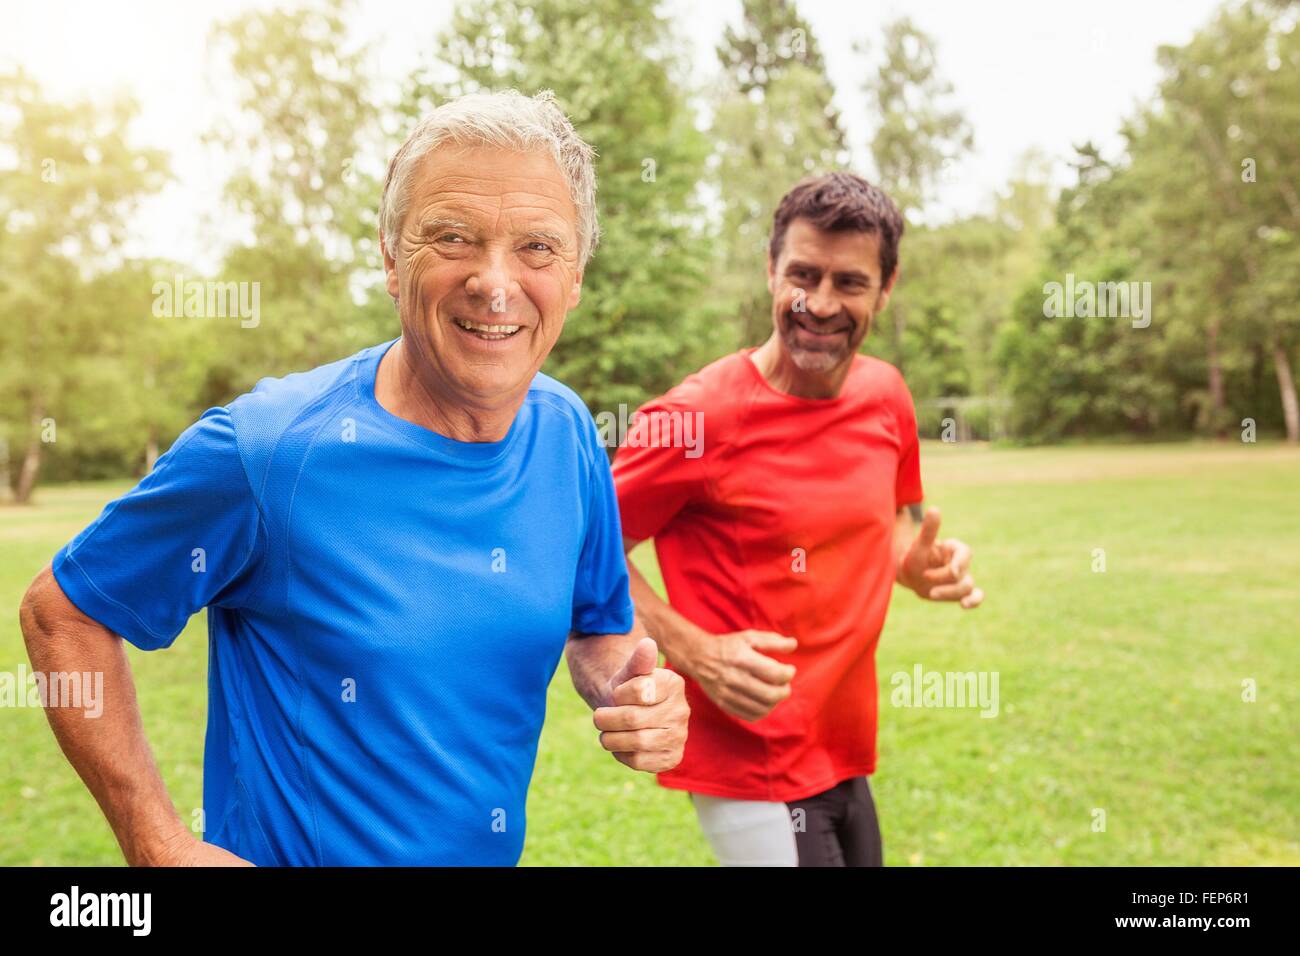 Two men running outdoors, smiling Stock Photo